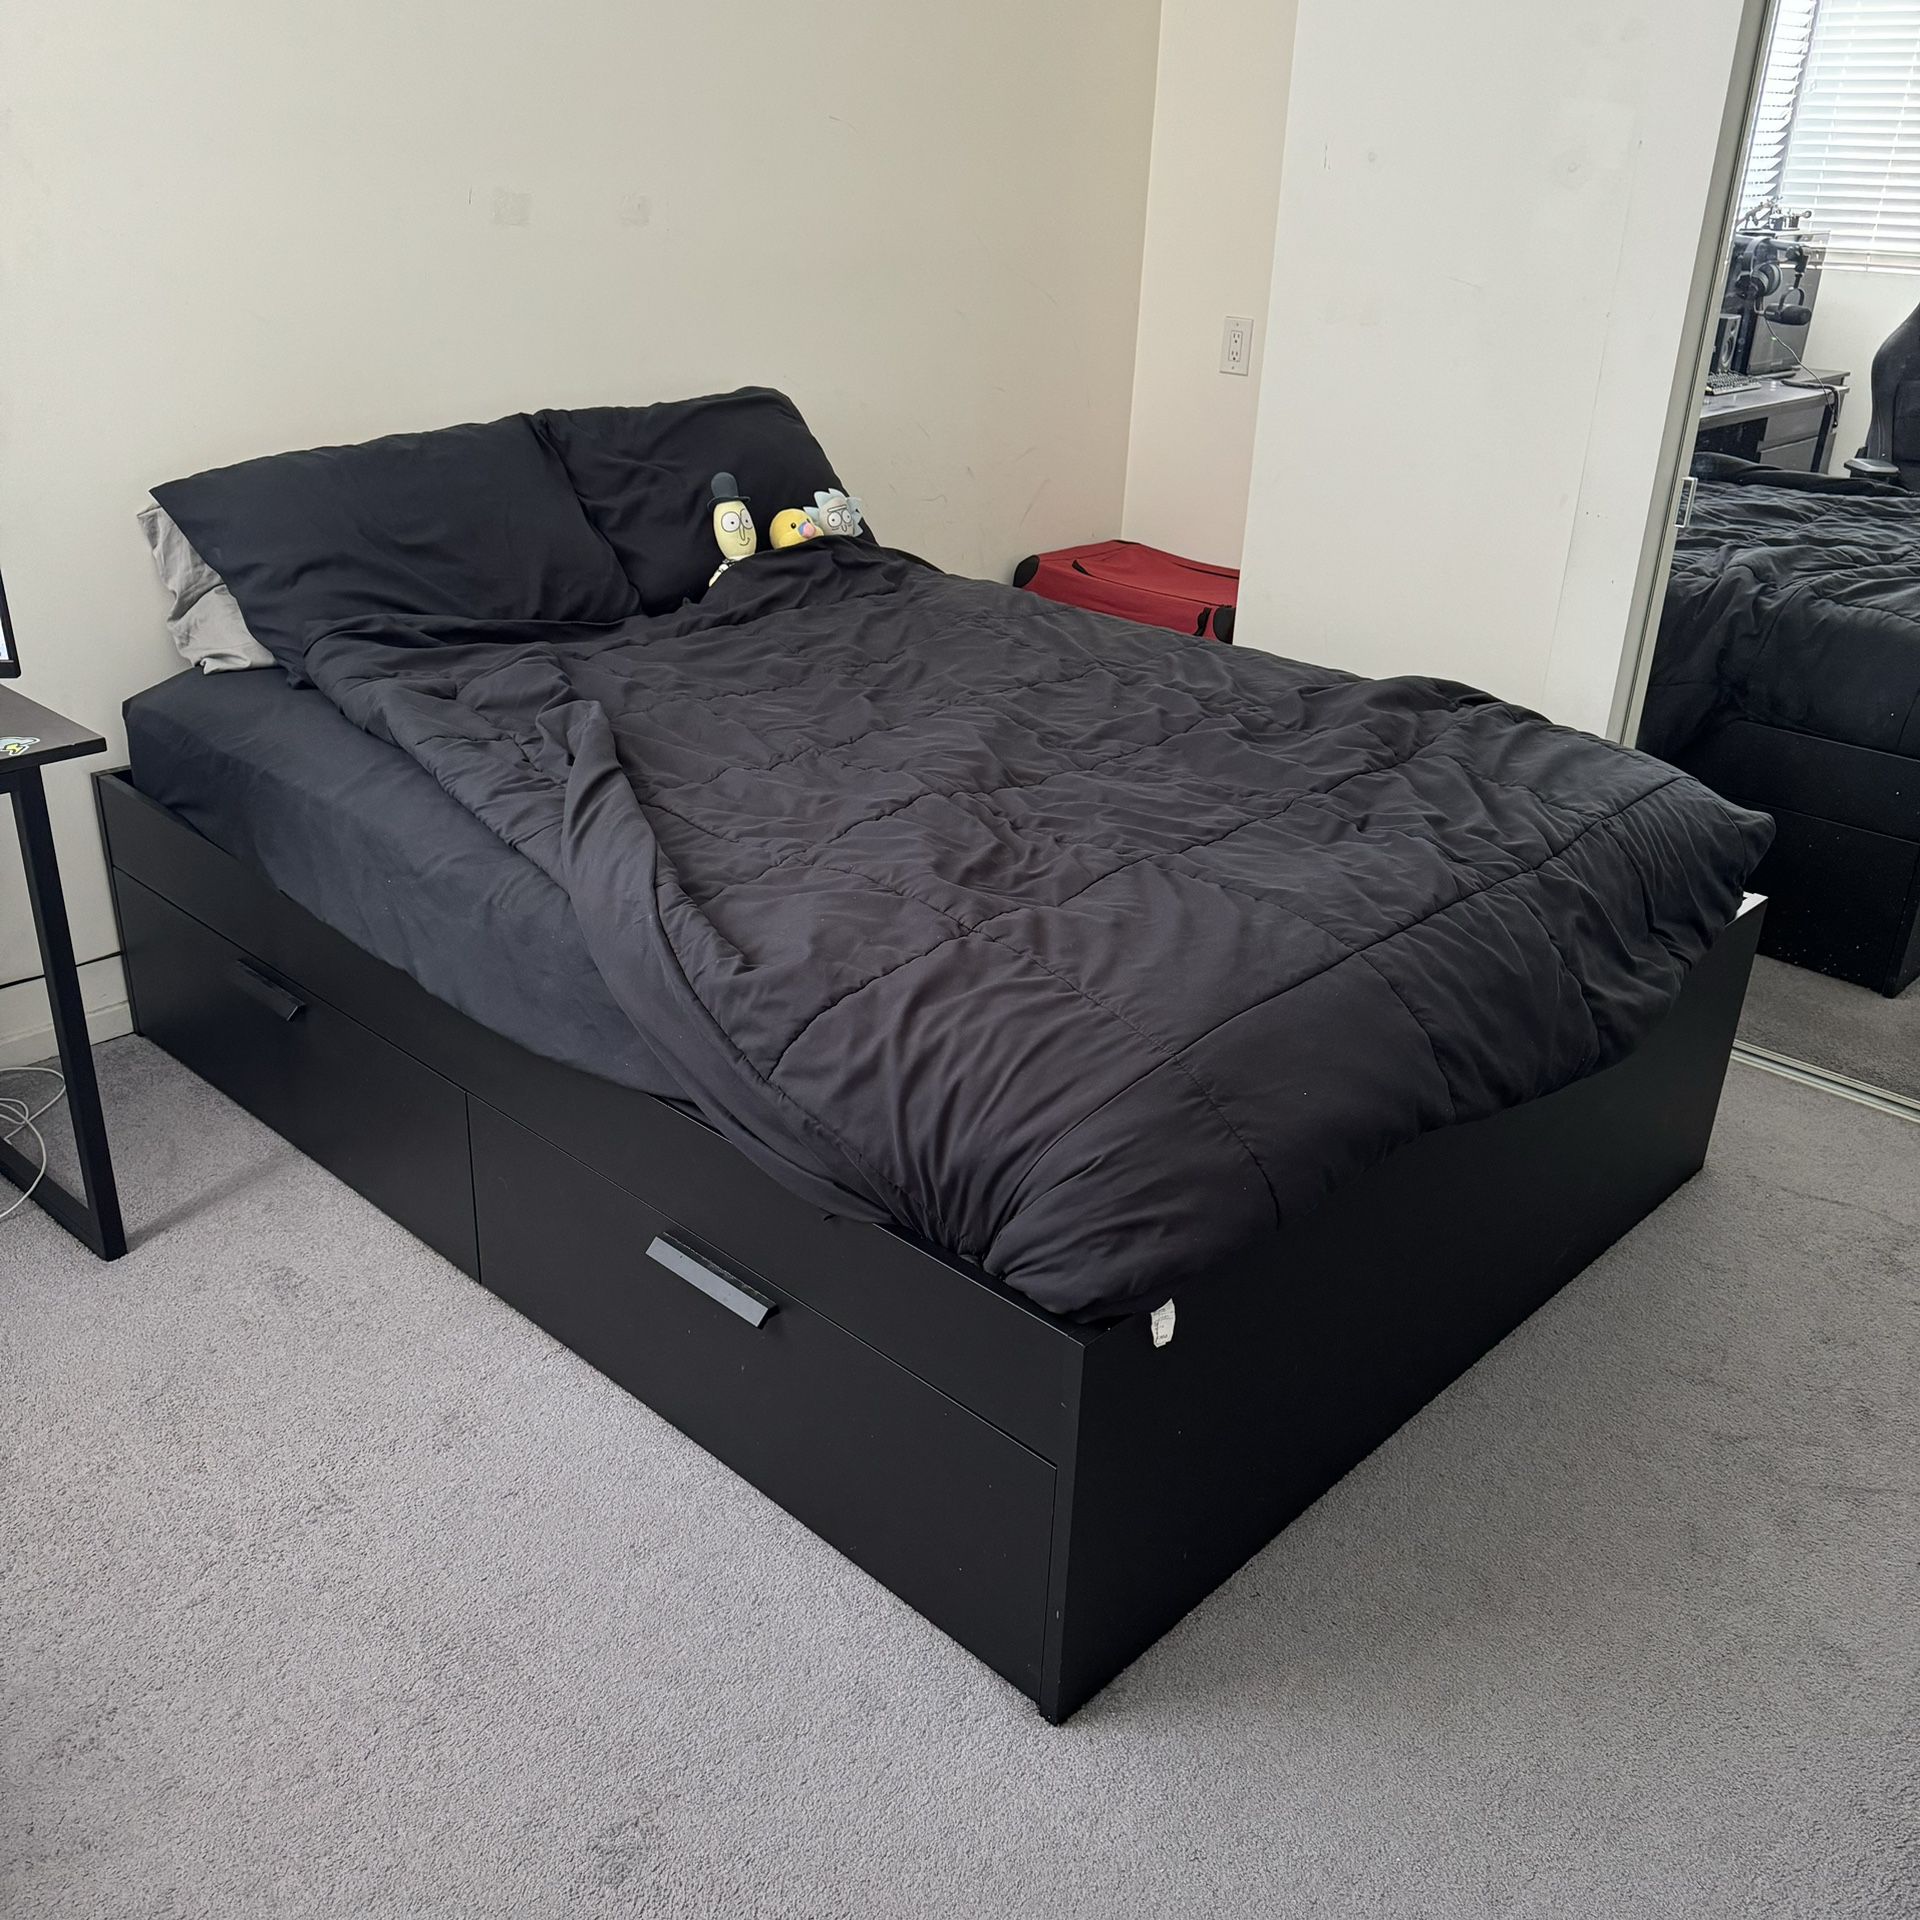 Queen Bed Frame W/ Storage (Bed Frame Only)